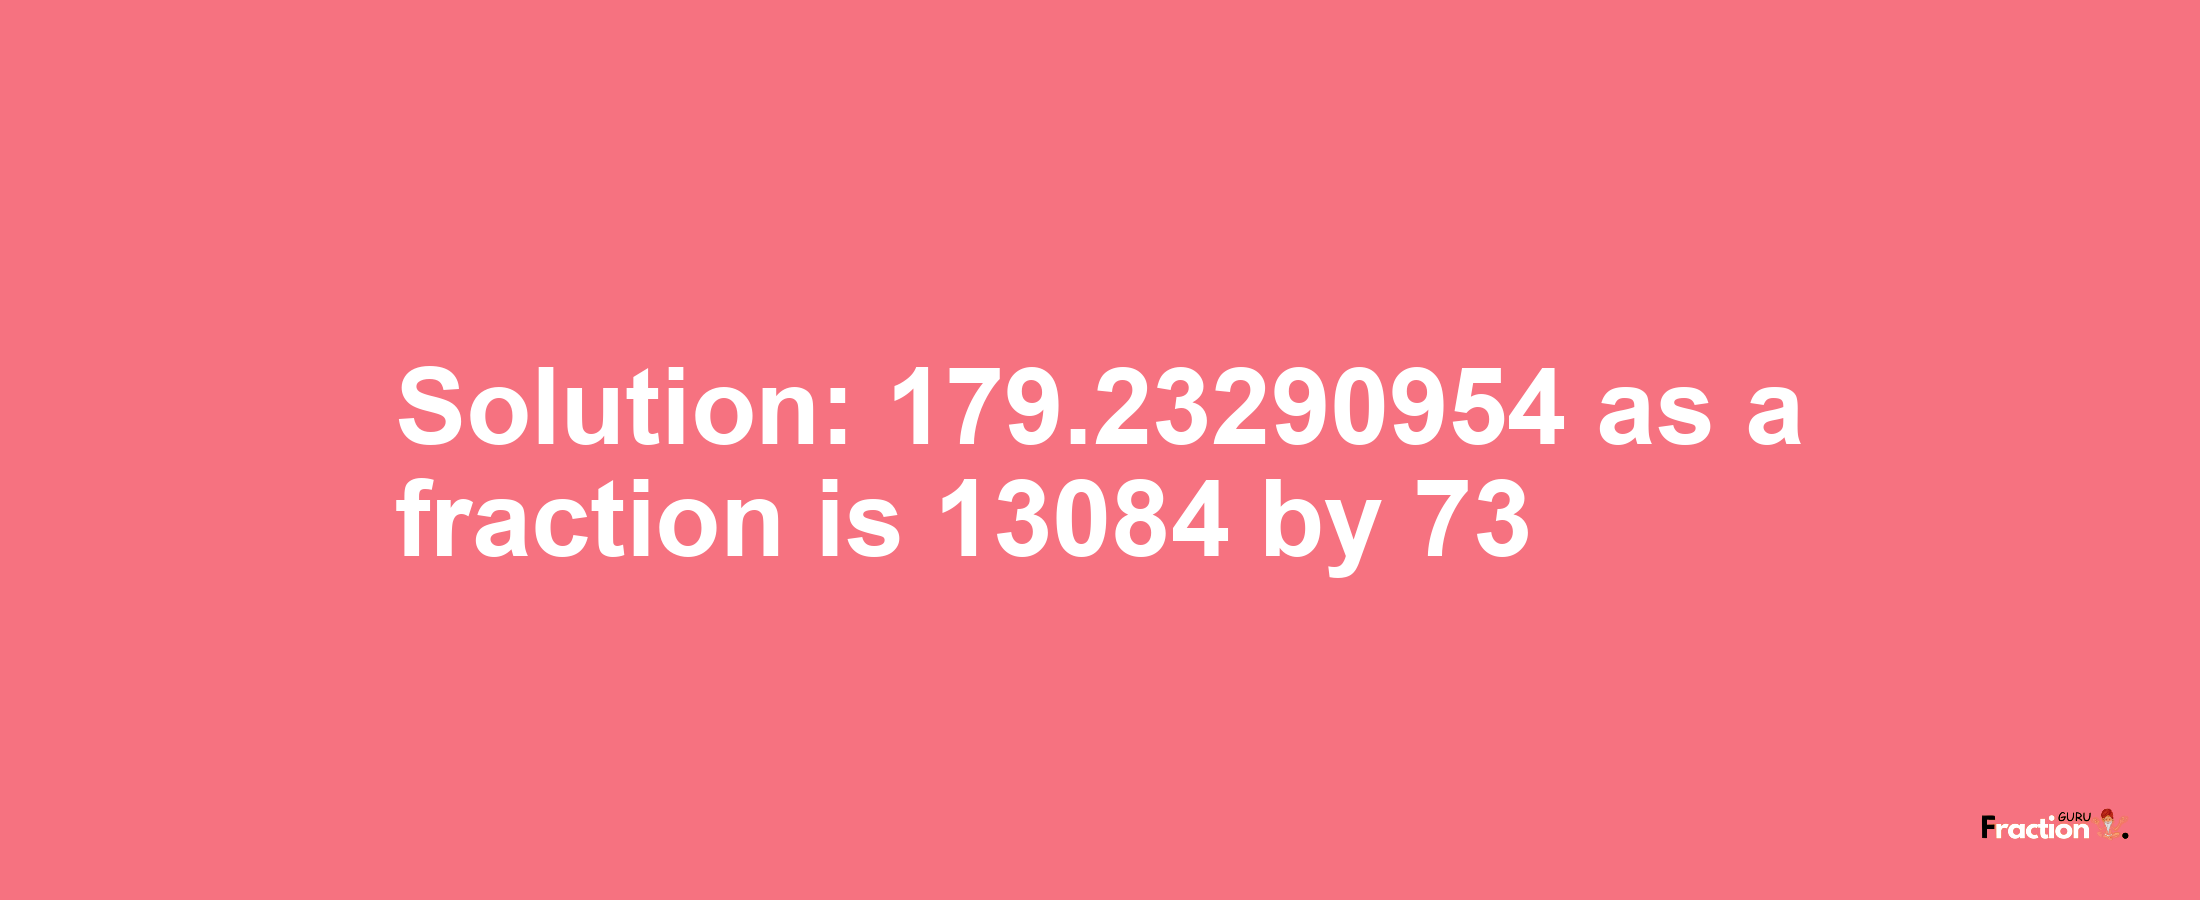 Solution:179.23290954 as a fraction is 13084/73